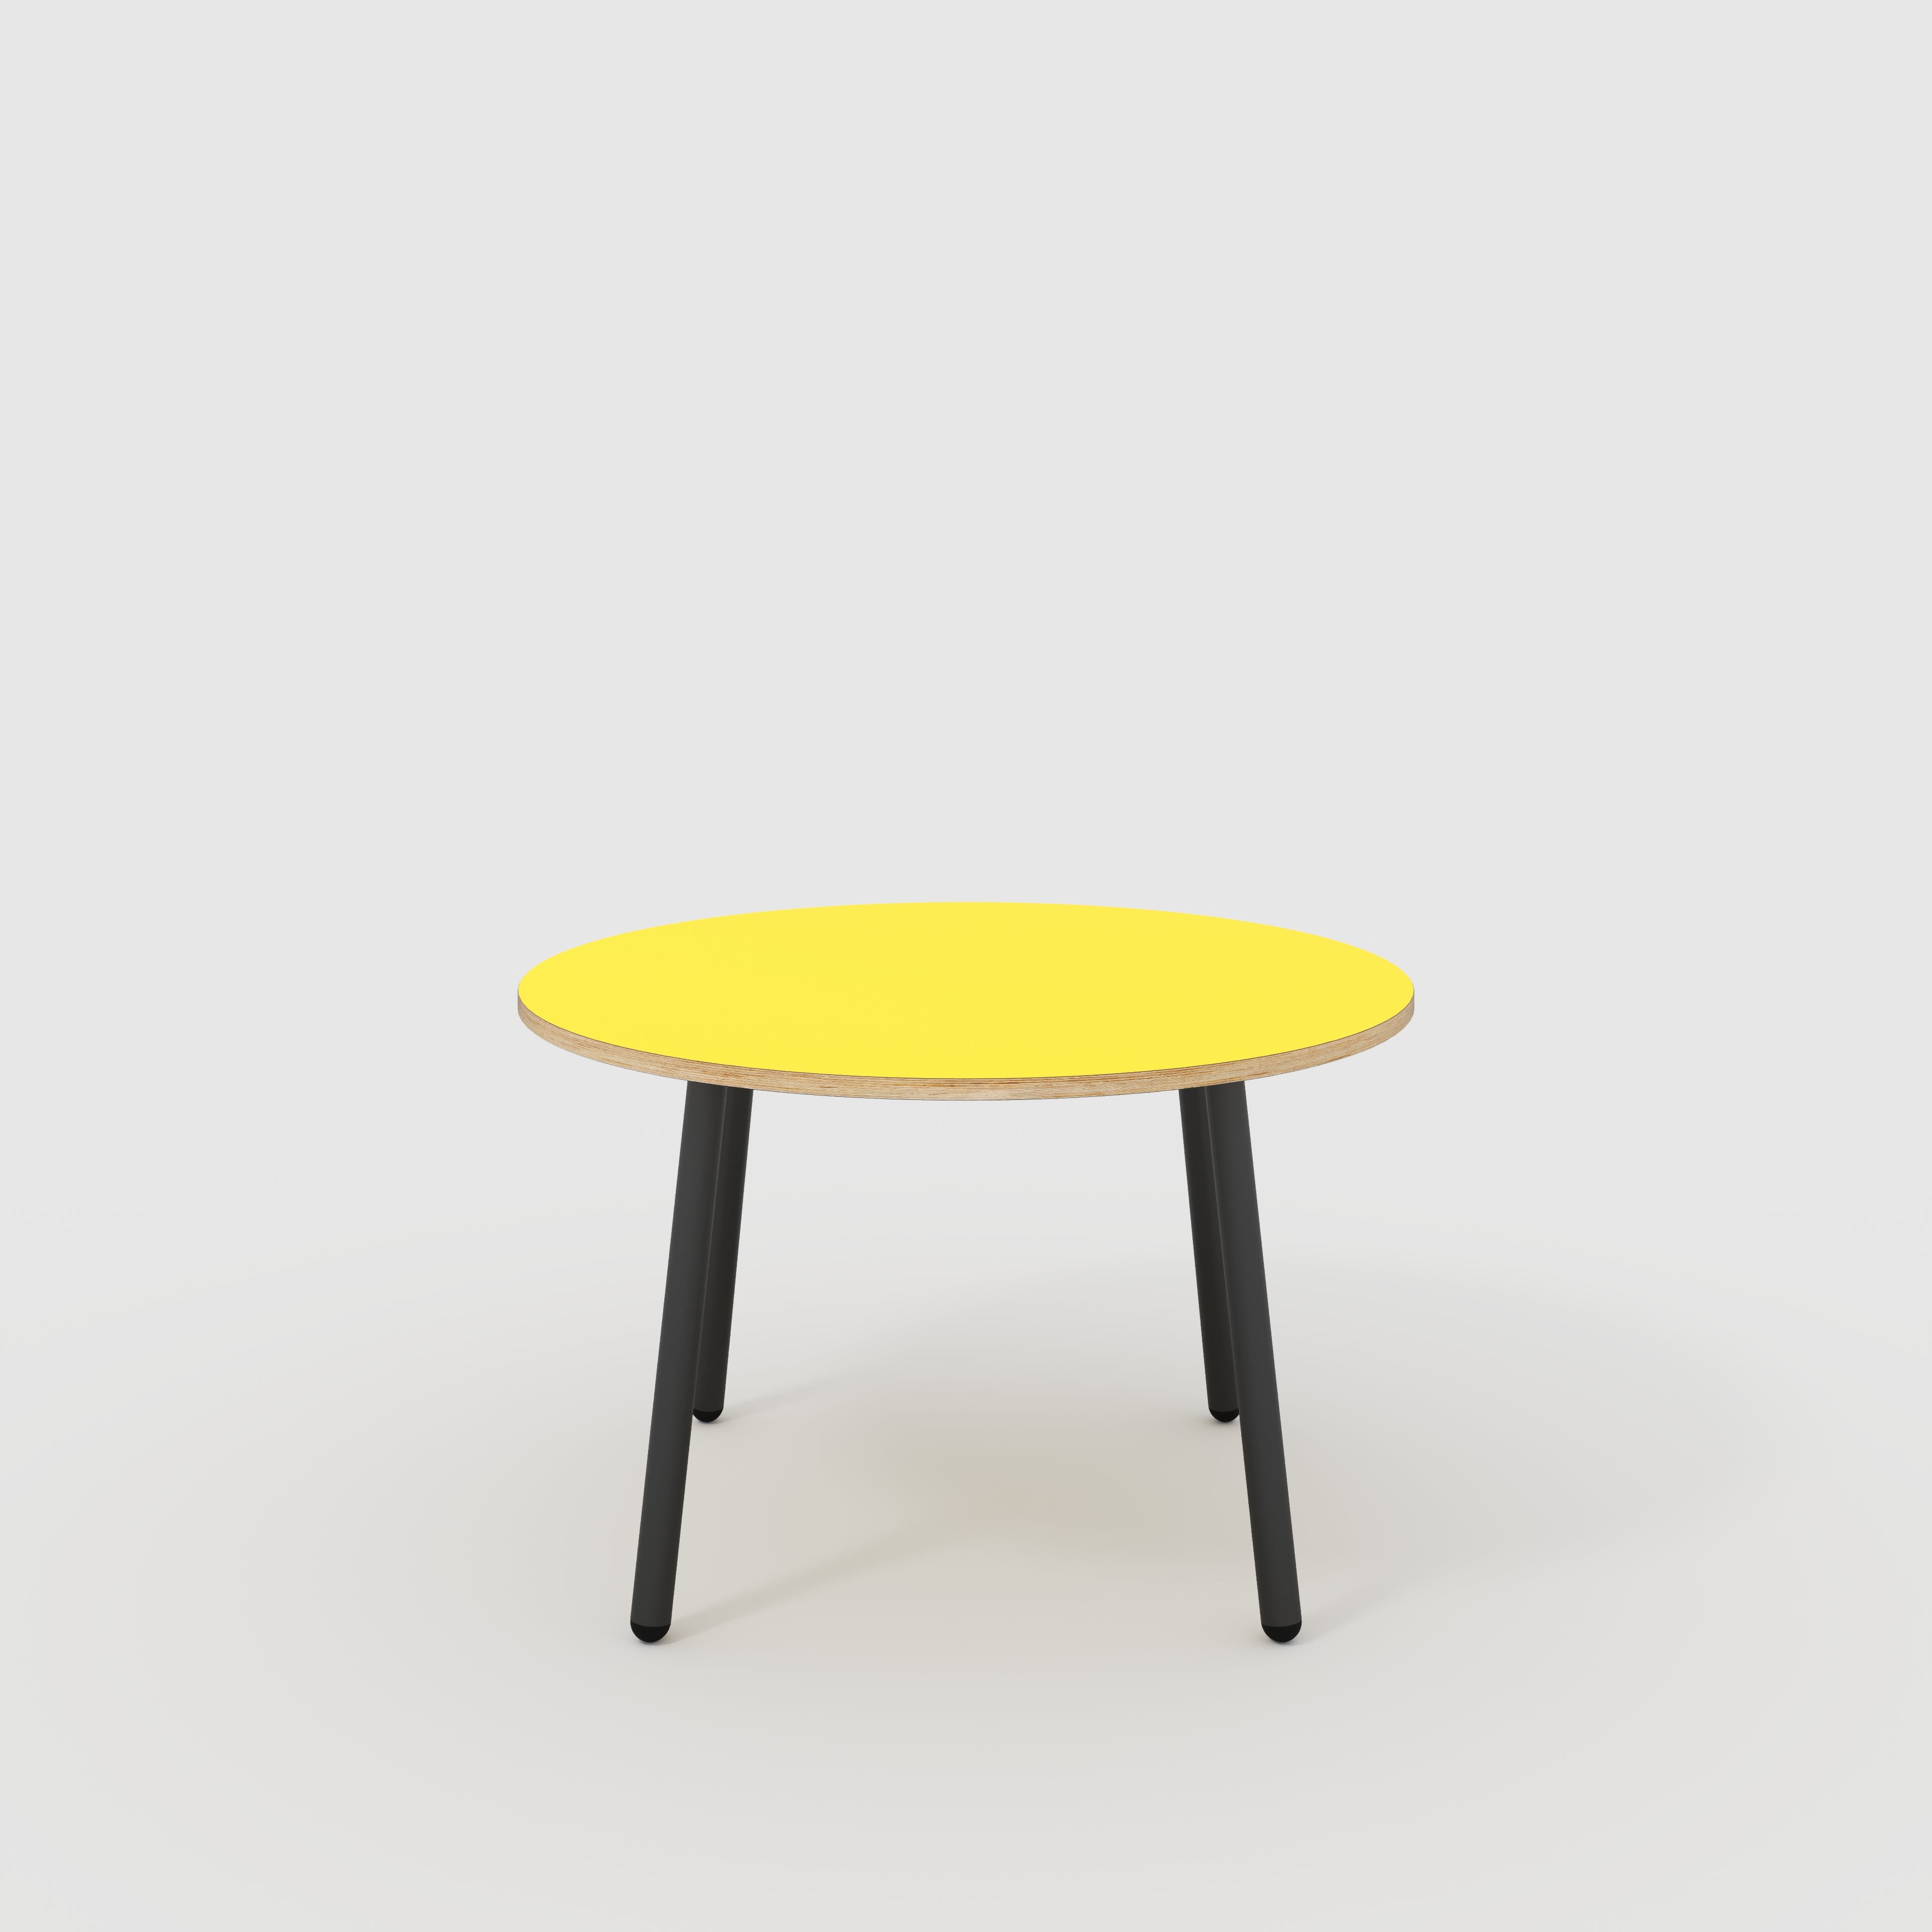 Round Table with Black Round Single Pin Legs - Formica Chrome Yellow - 1200(dia) x 750(h)